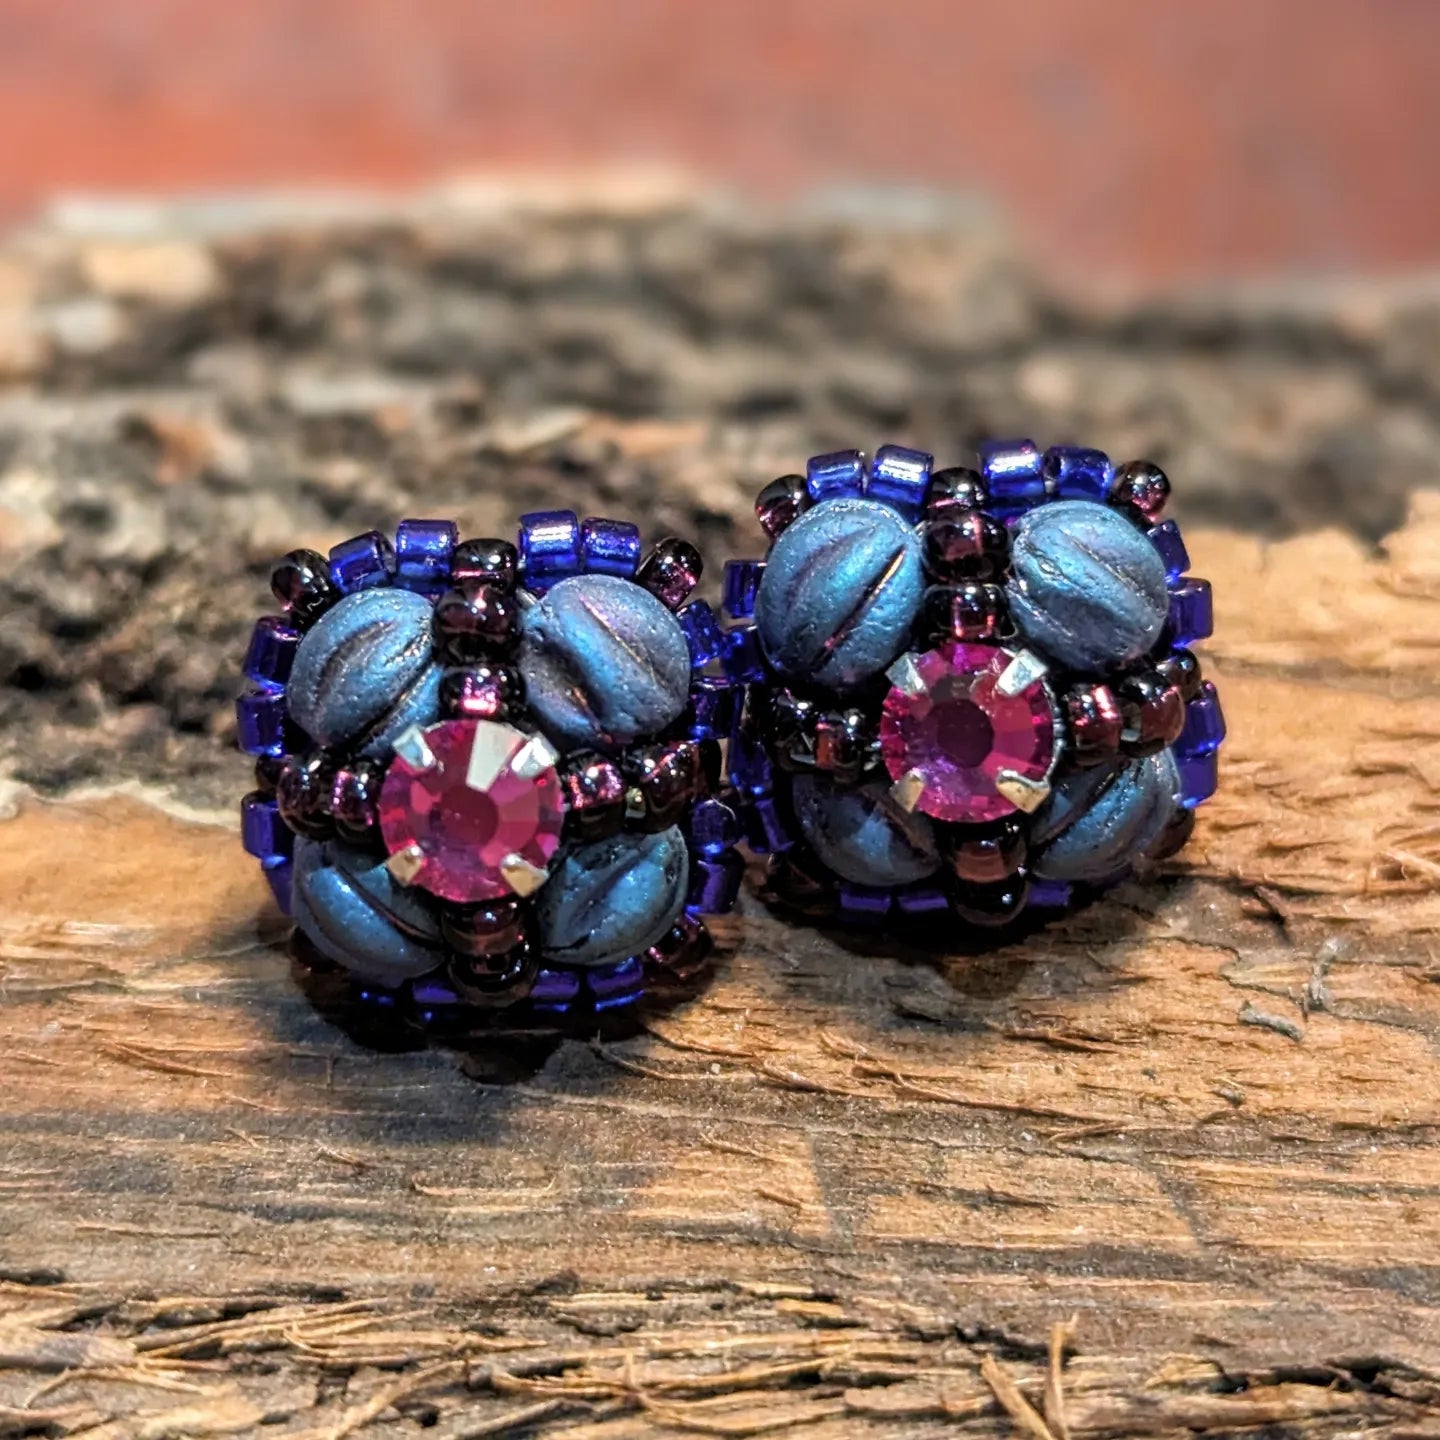 Four-sided purple and pink flower shaped stud earrings set on wood.